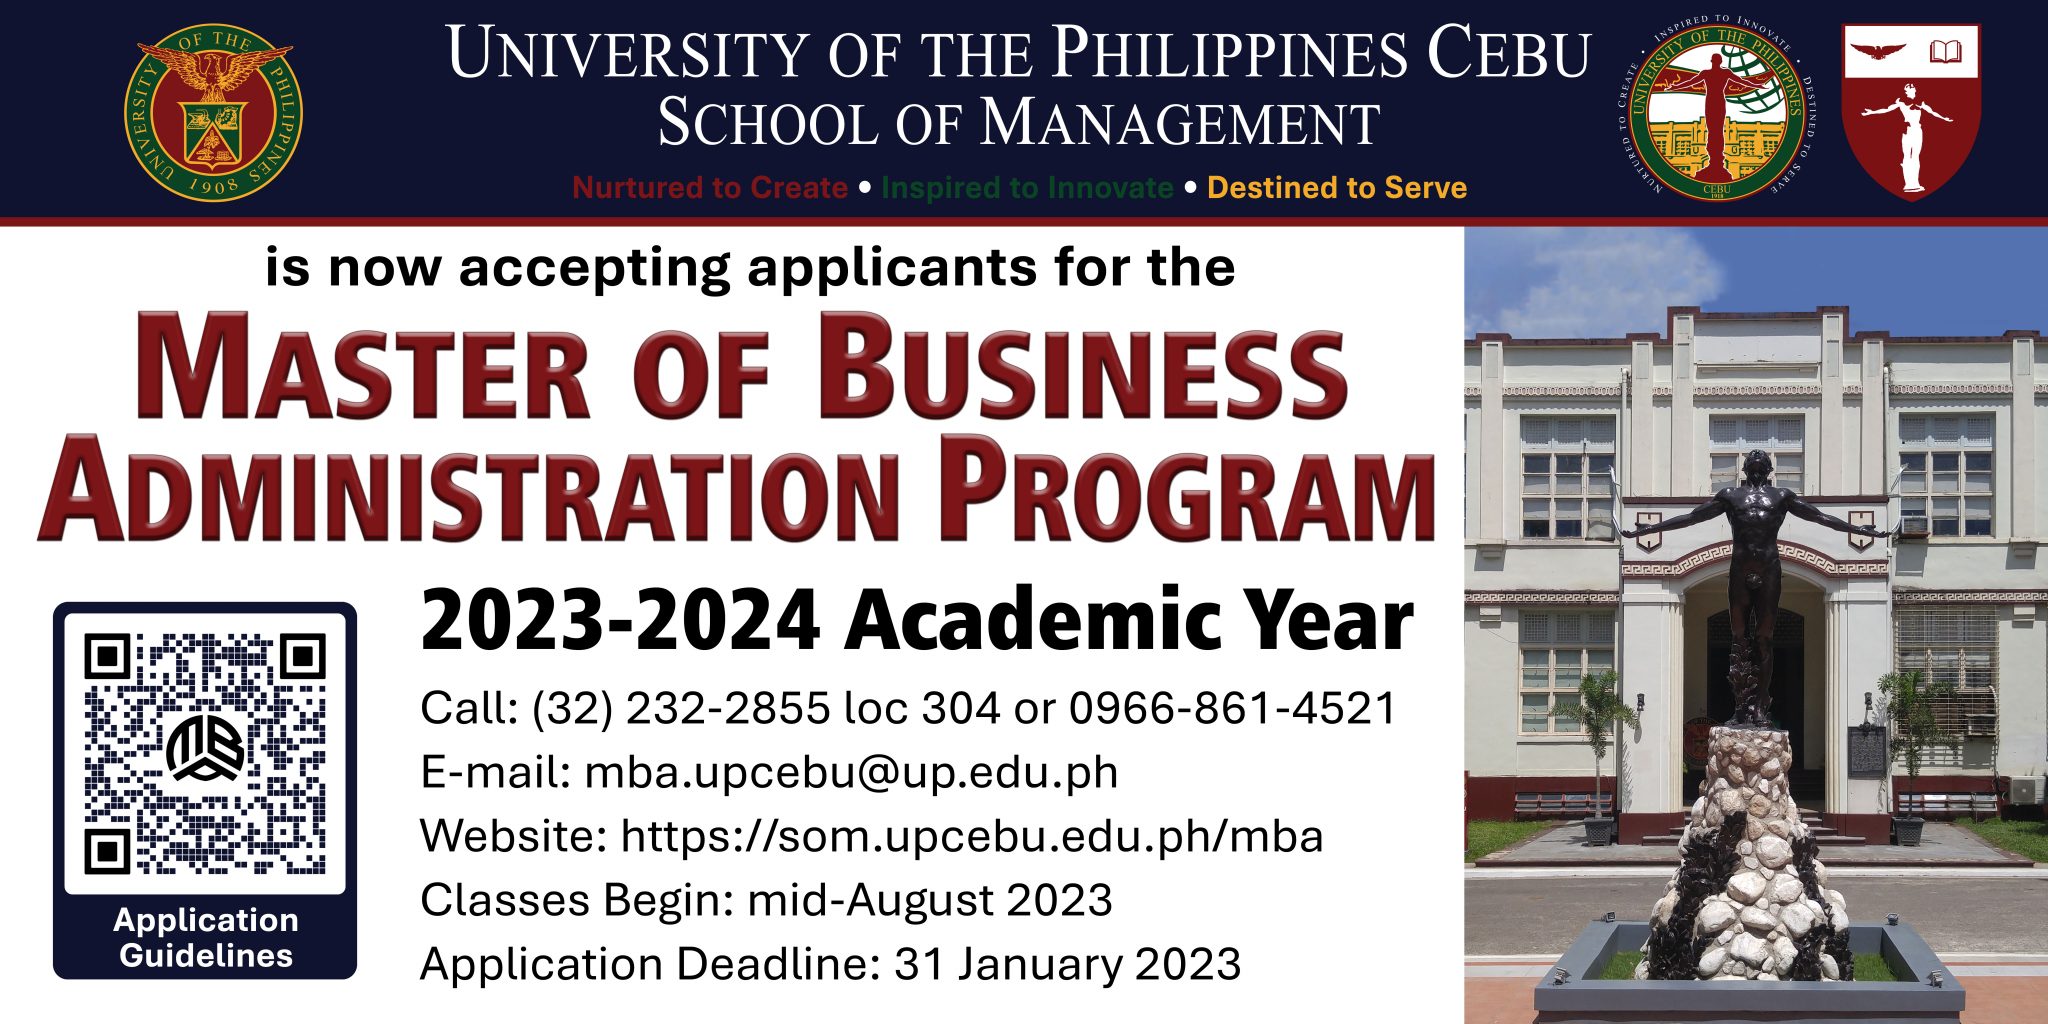 mba non thesis philippines online